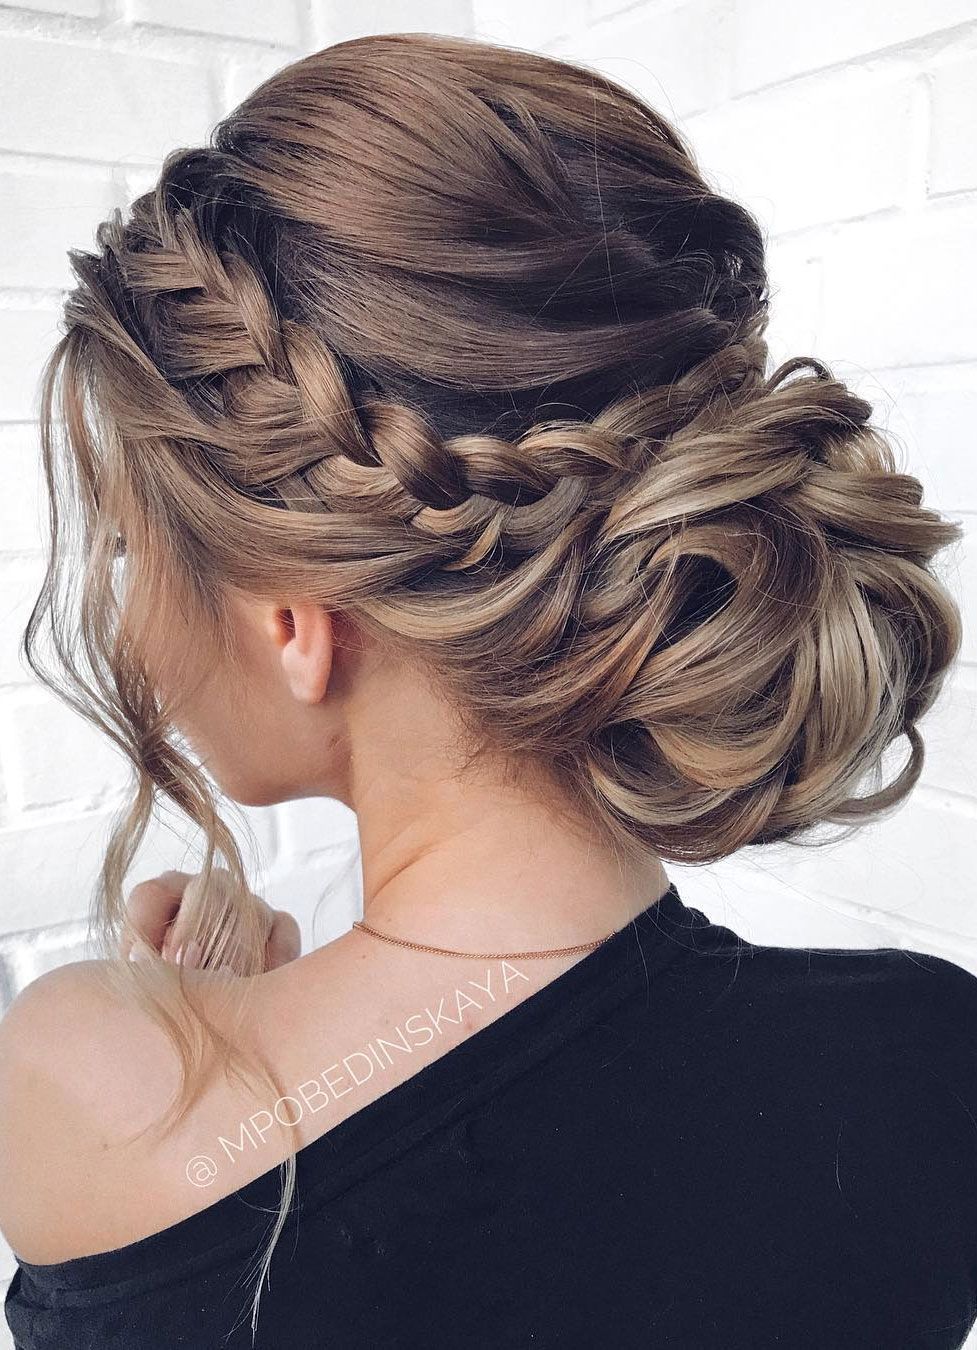 55 Amazing updo hairstyle with the wow factor